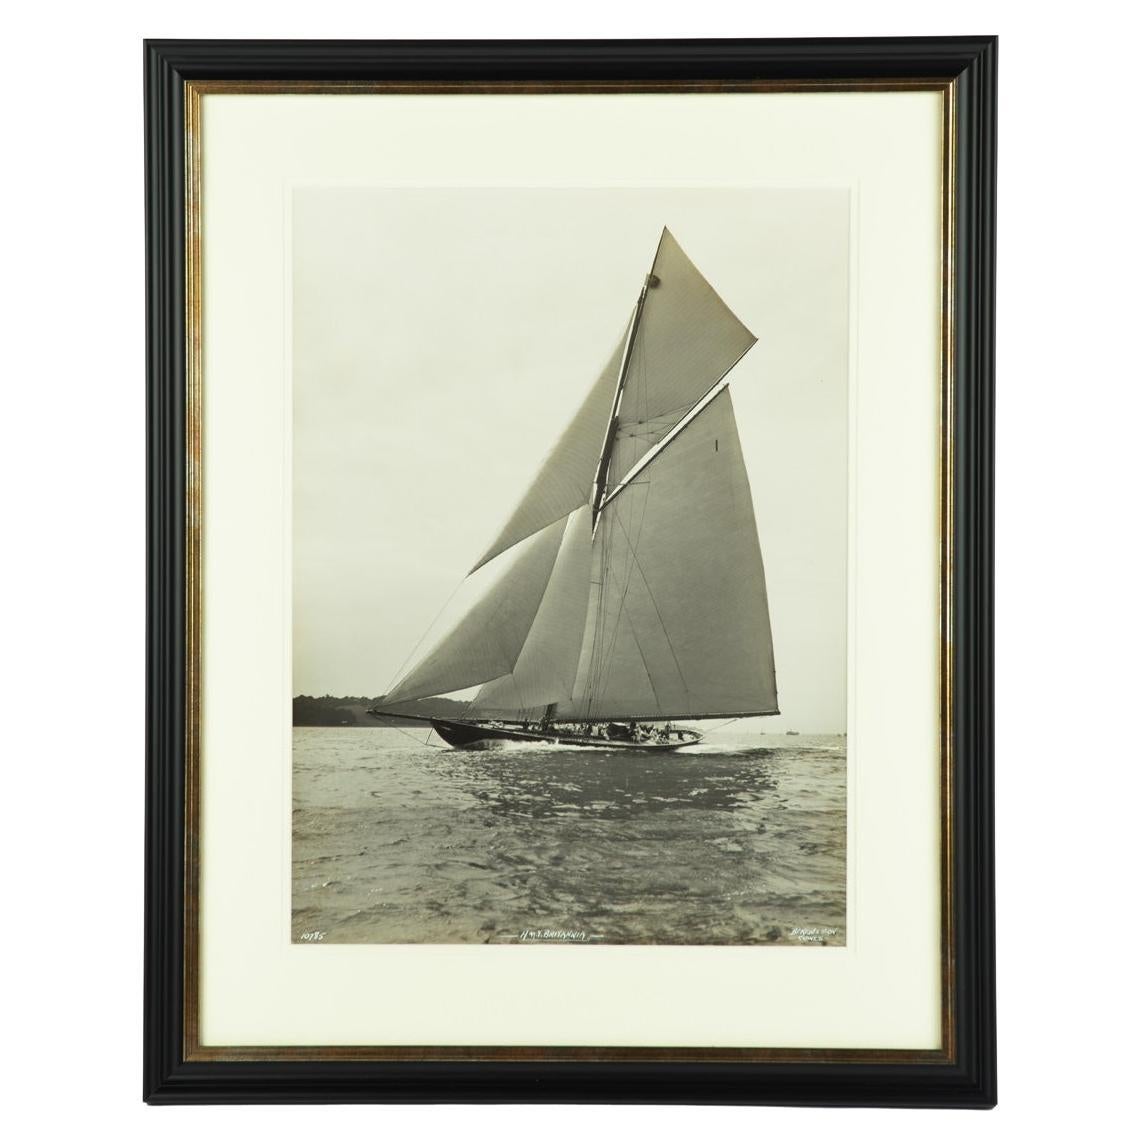 A large silver gelatin photographic print of H.M.Y. Britannia by Beken